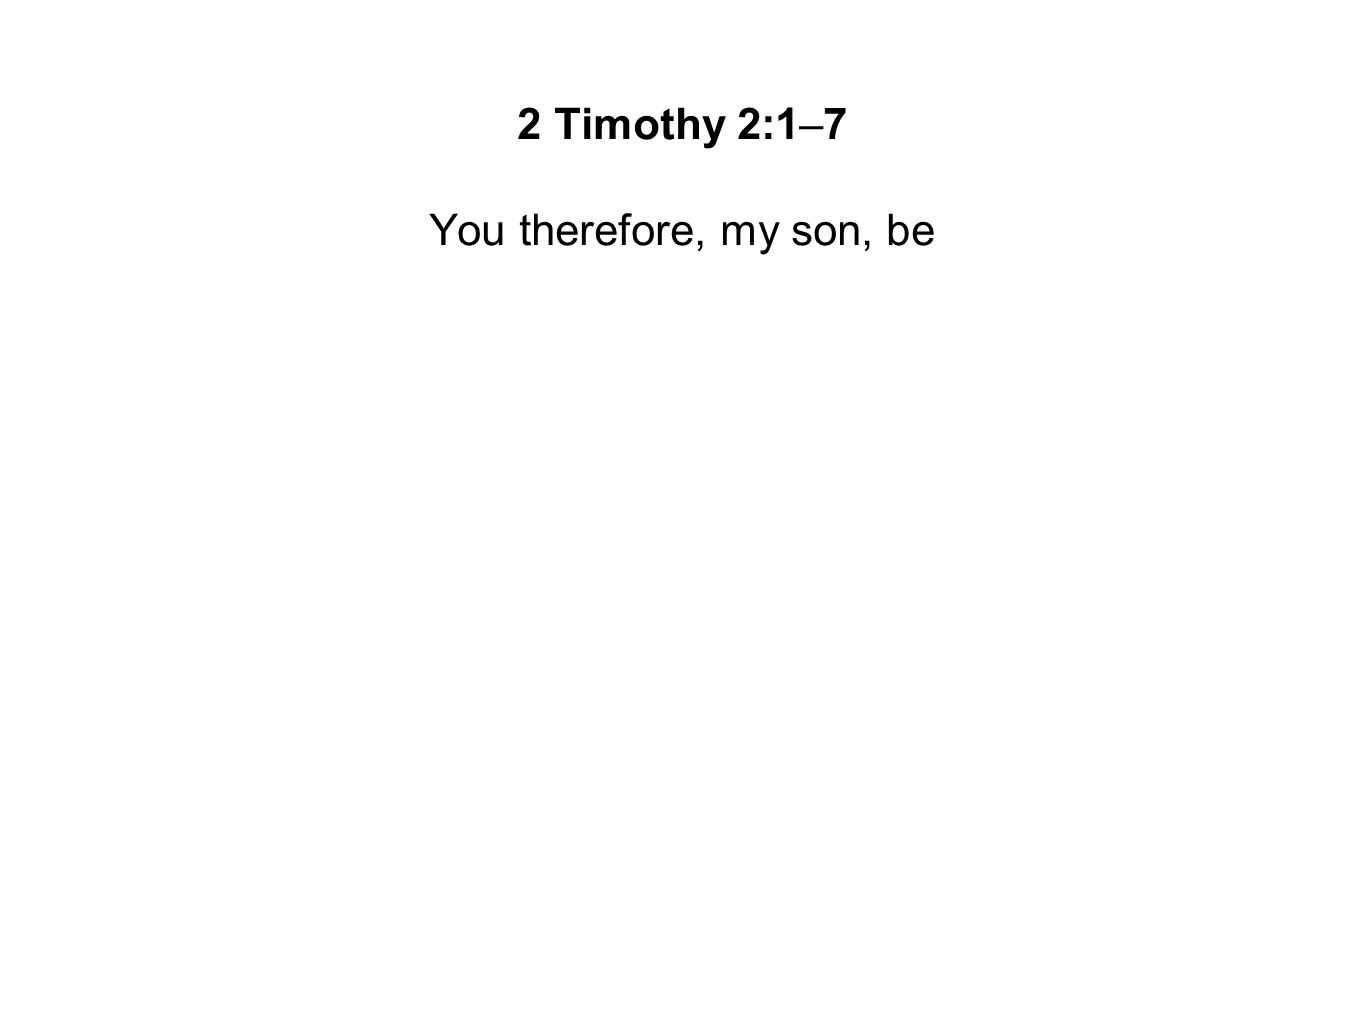 You therefore, my son, be